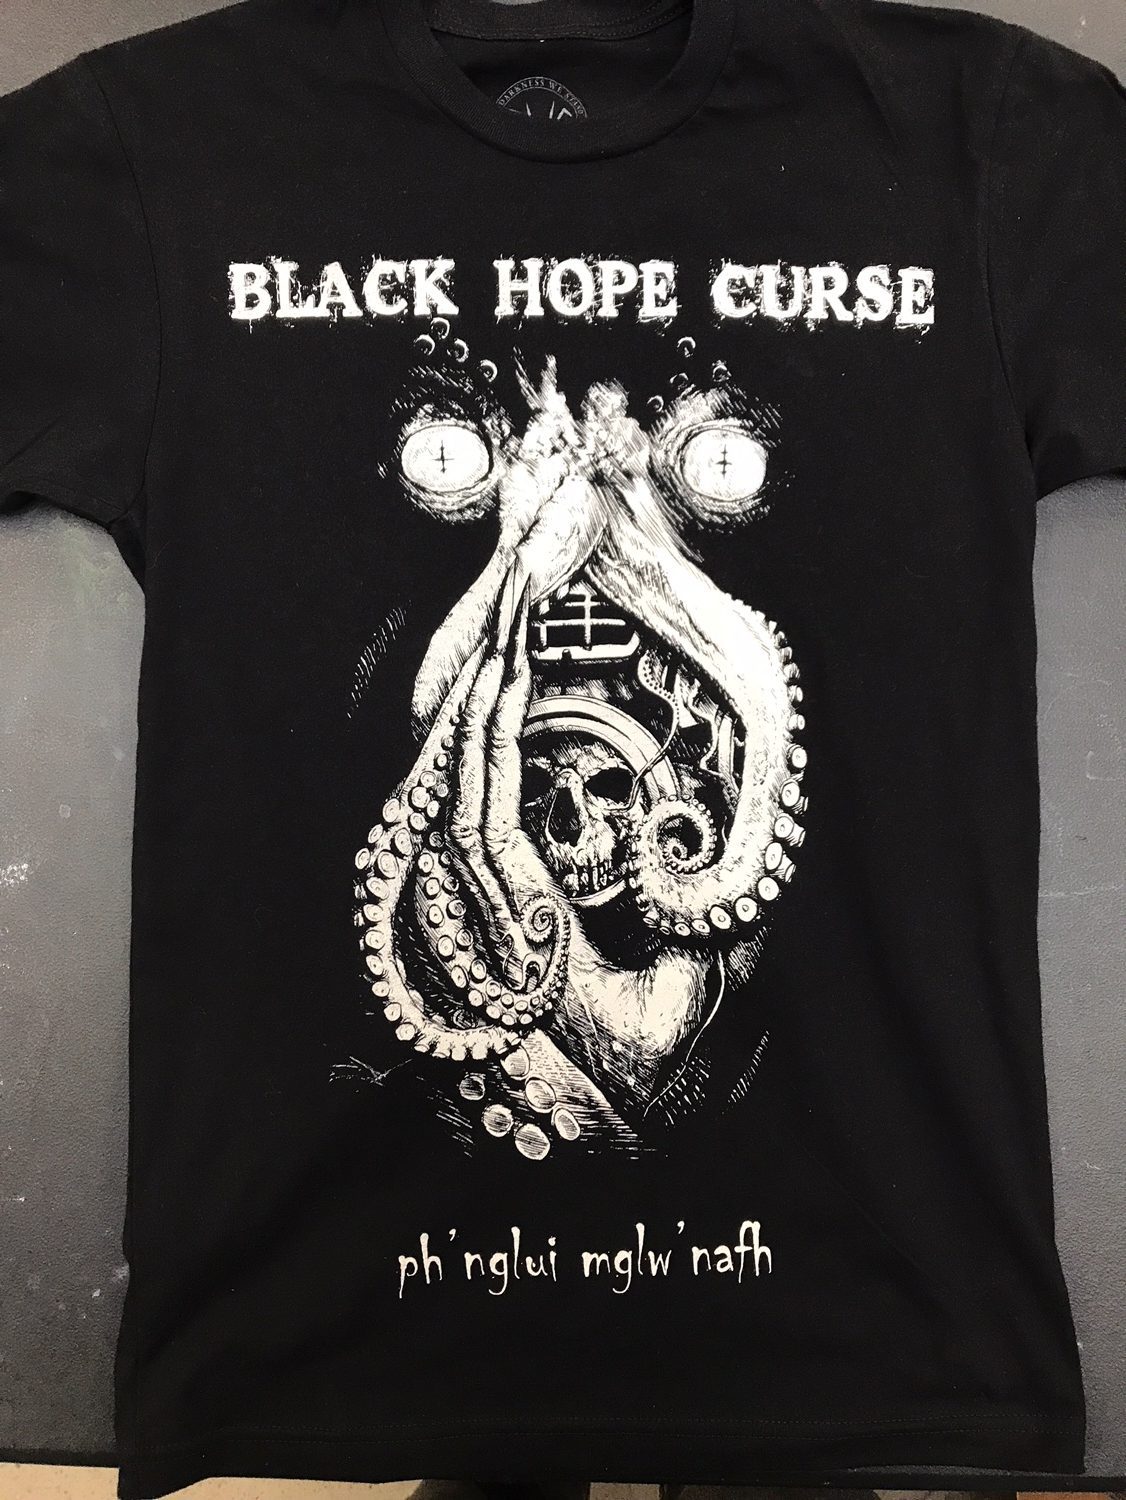 My Shirt For Black Hope Curse is out!